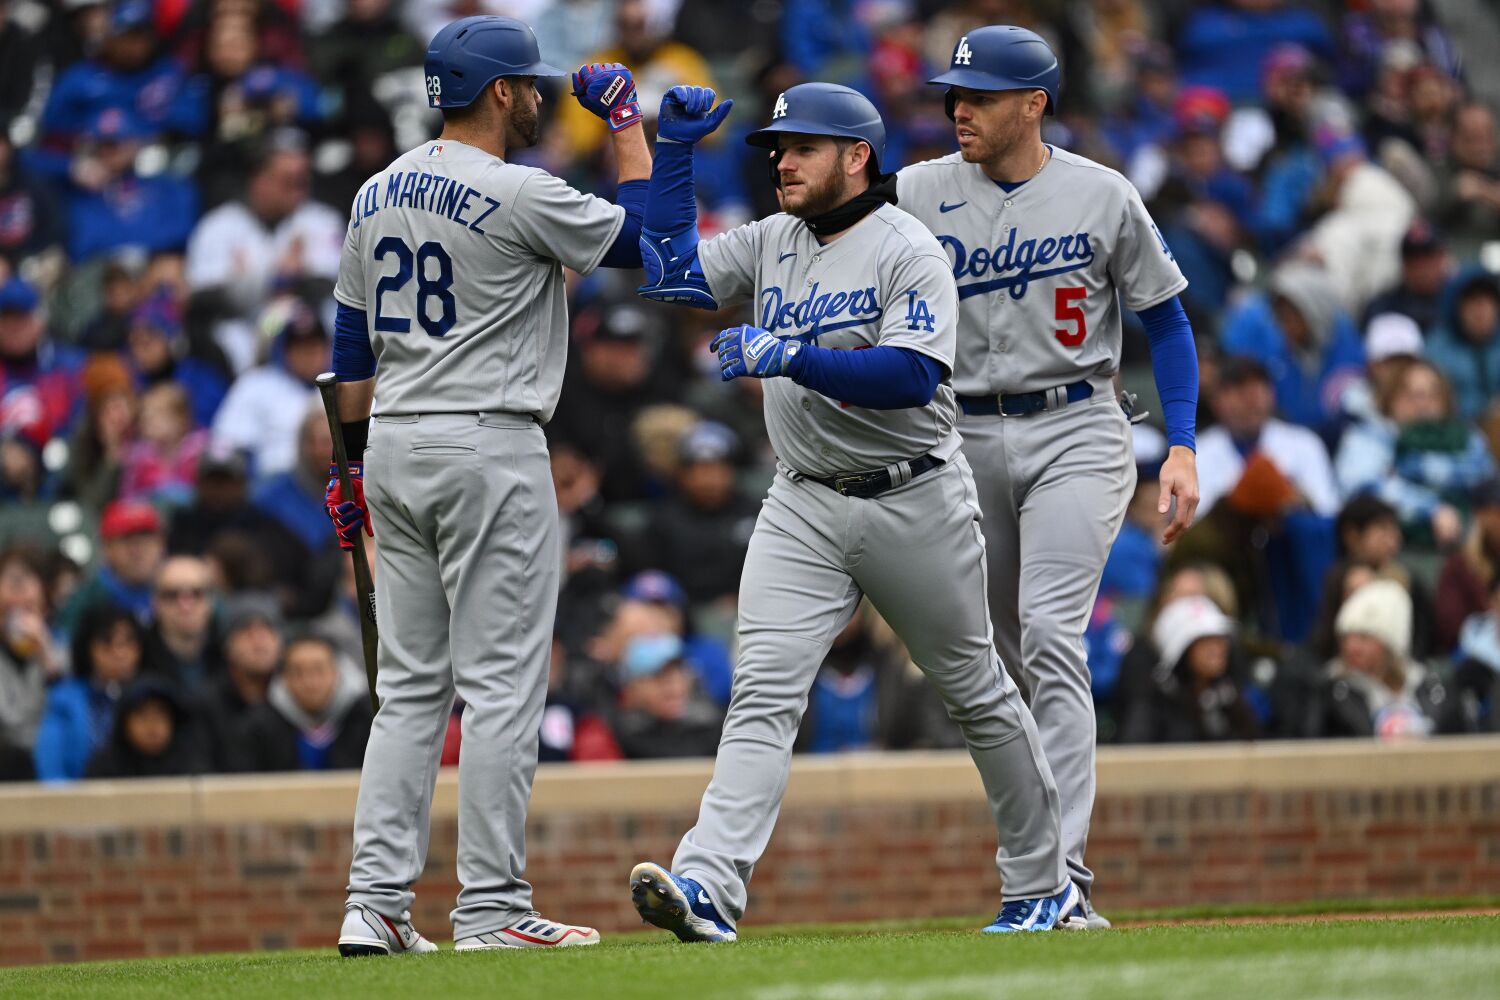 Too many home runs? Long-ball reliance isn't fazing Dodgers after series win